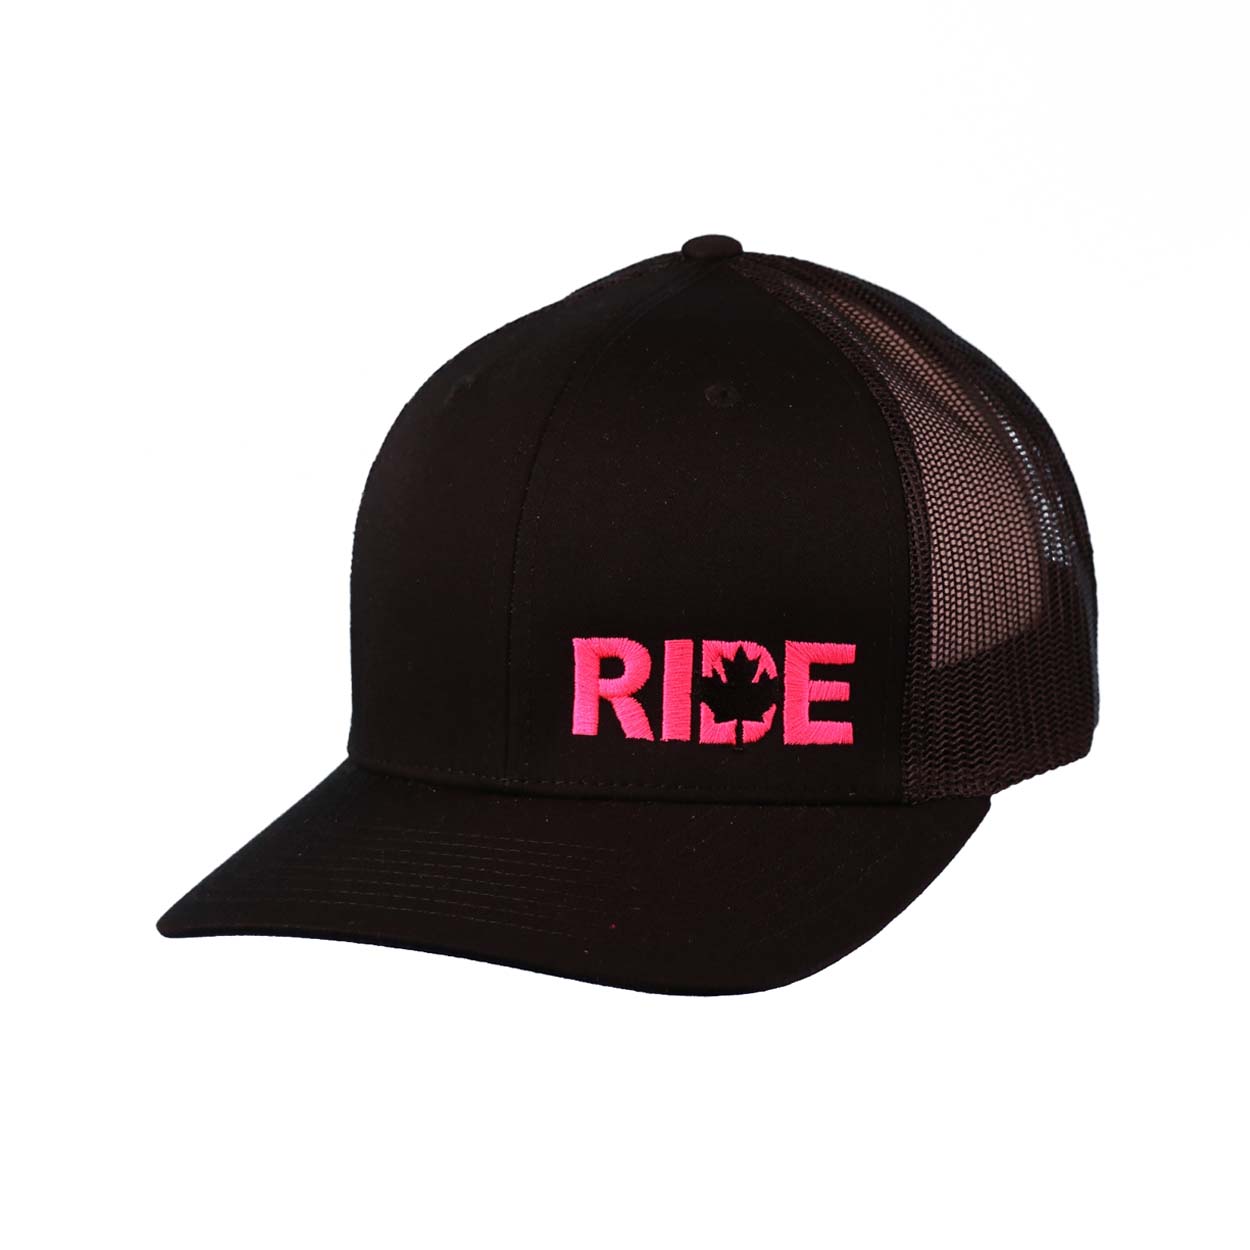 Ride Canada Classic Pro Night Out Embroidered Snapback Trucker Hat Black/Pink